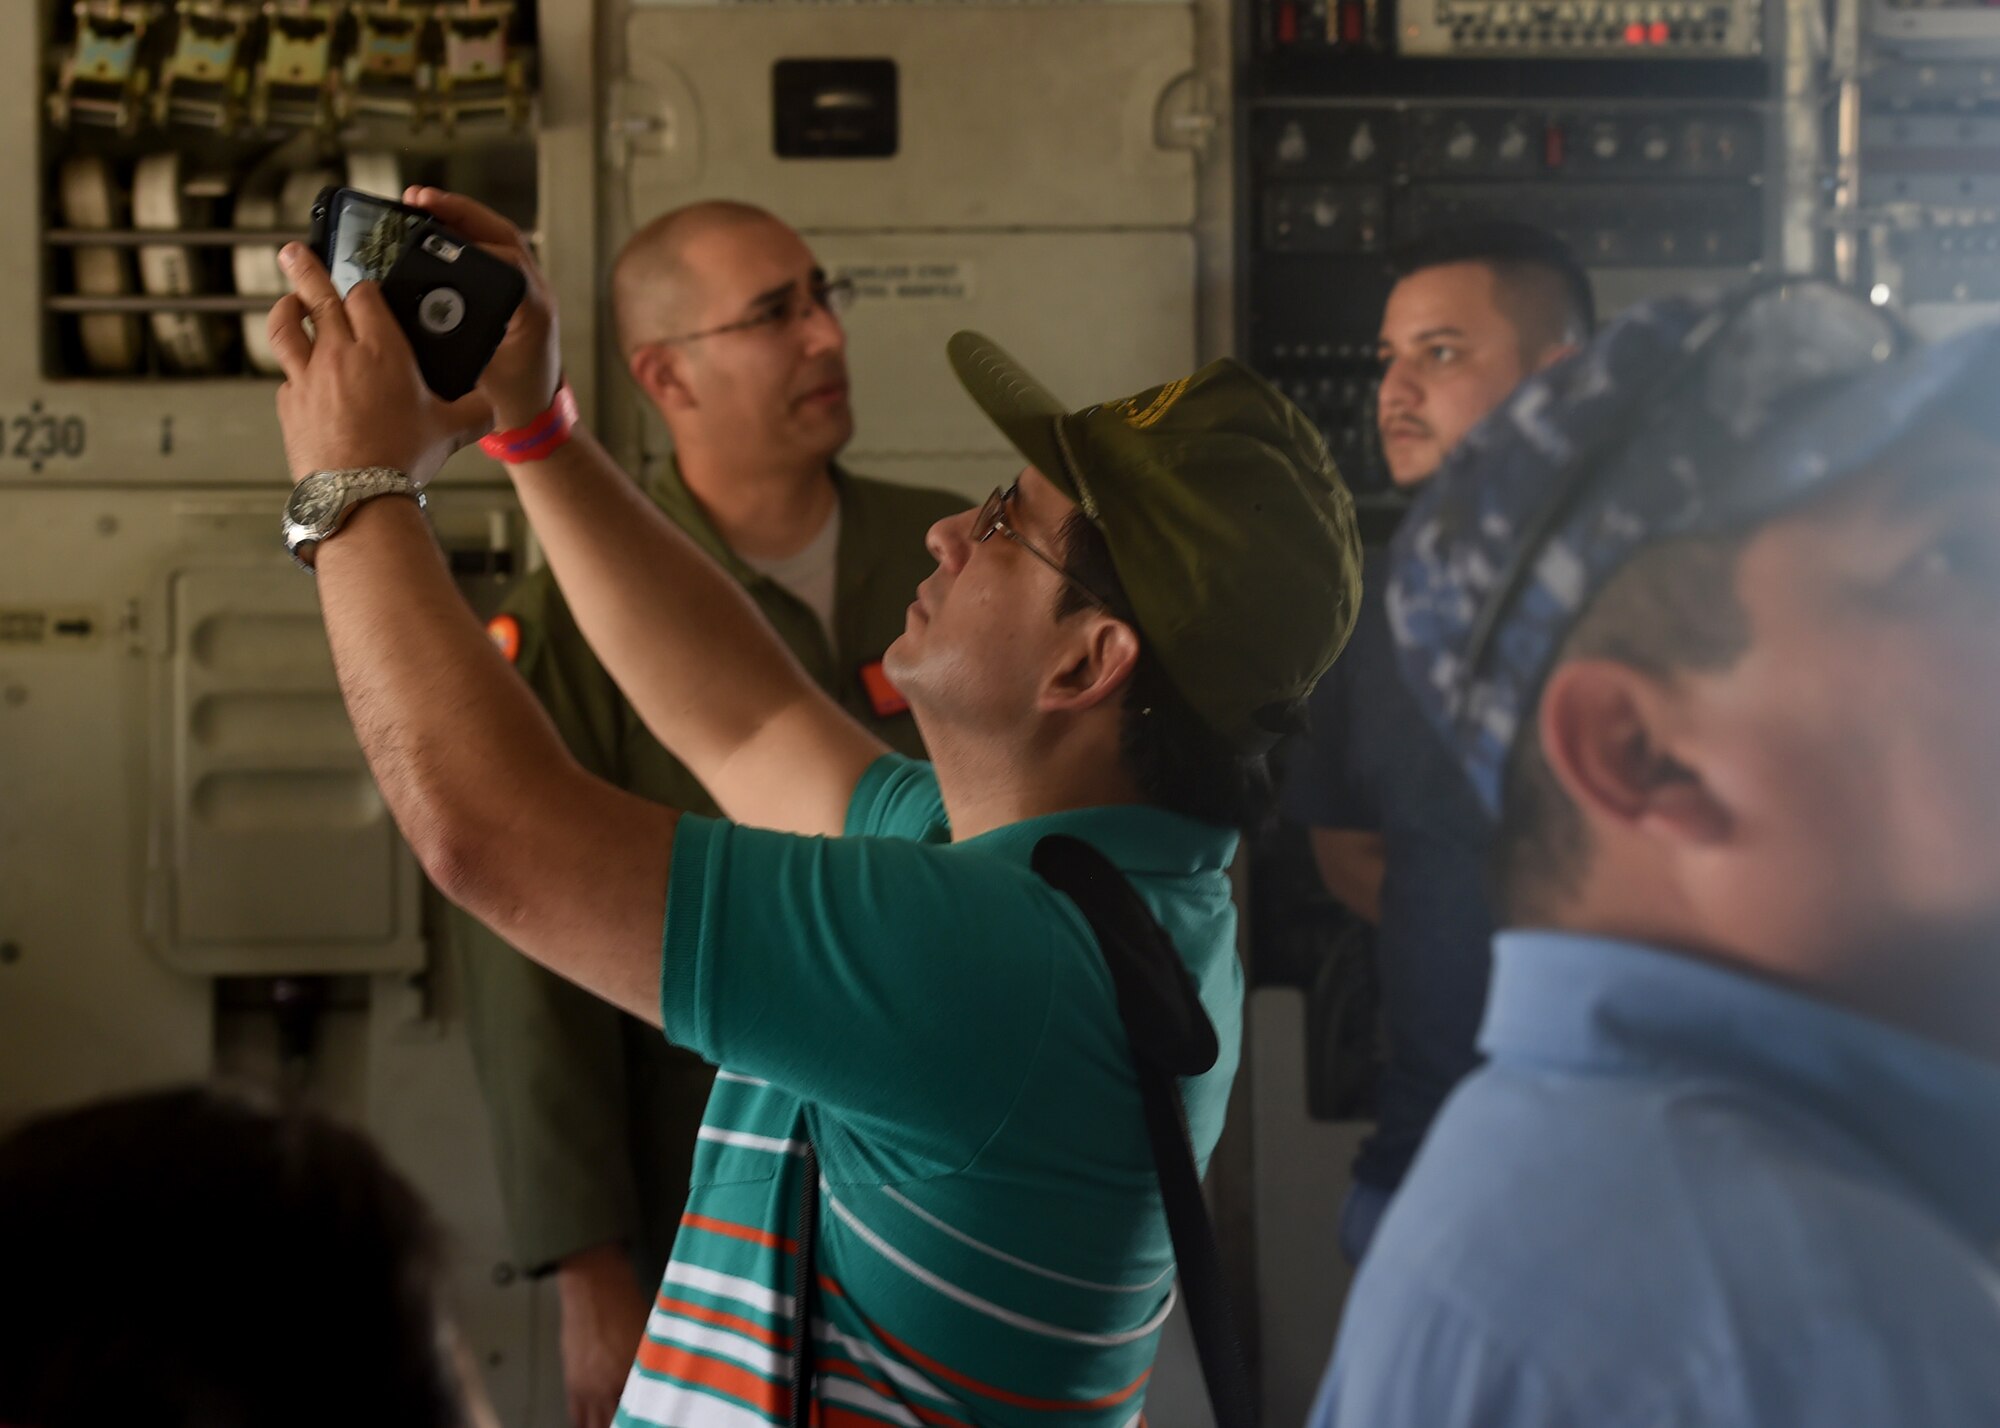 A citizen from El Salvador, takes a photo inside a U.S. Air Force C-17 Globemaster III cargo aircraft, 58th Airlift Squadron, at Ilopango International Airport in San Salvador, El Savador, Jan. 30, during the 2016 Ilopango Airshow. The C-17 was sent from Altus Air Force Base, Okla., to foster relationships between the U.S. and El Salvador. The aircraft was setup as a static display for the attendees to view and learn about some of its capabilities. (U.S. Air Force photo by Senior Airman Franklin R. Ramos/Released)